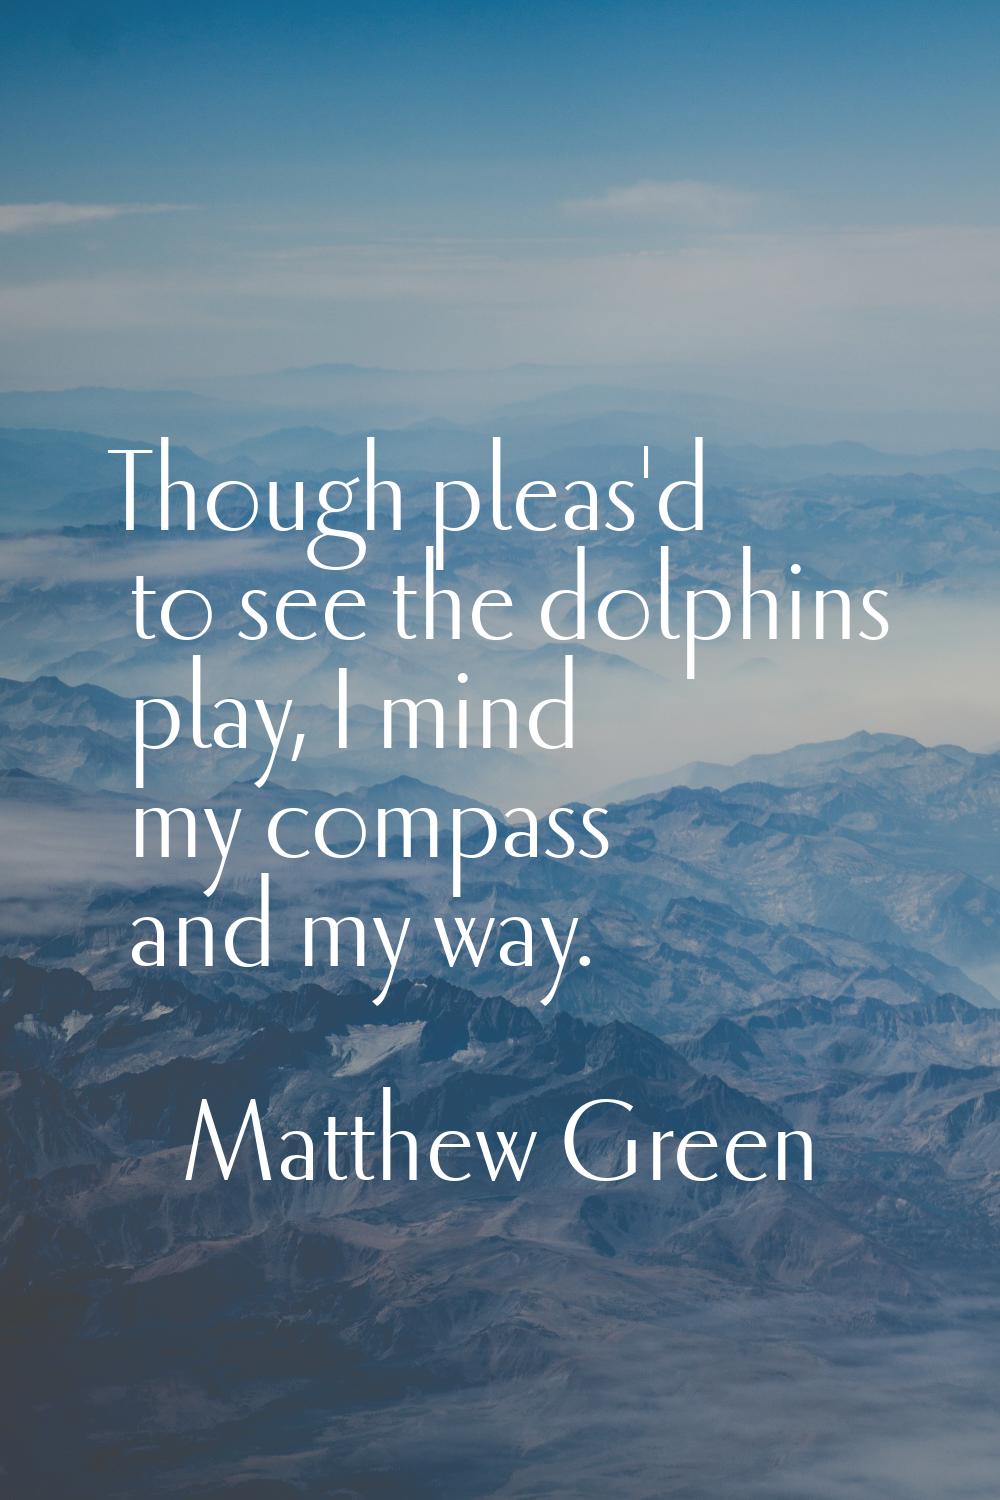 Though pleas'd to see the dolphins play, I mind my compass and my way.